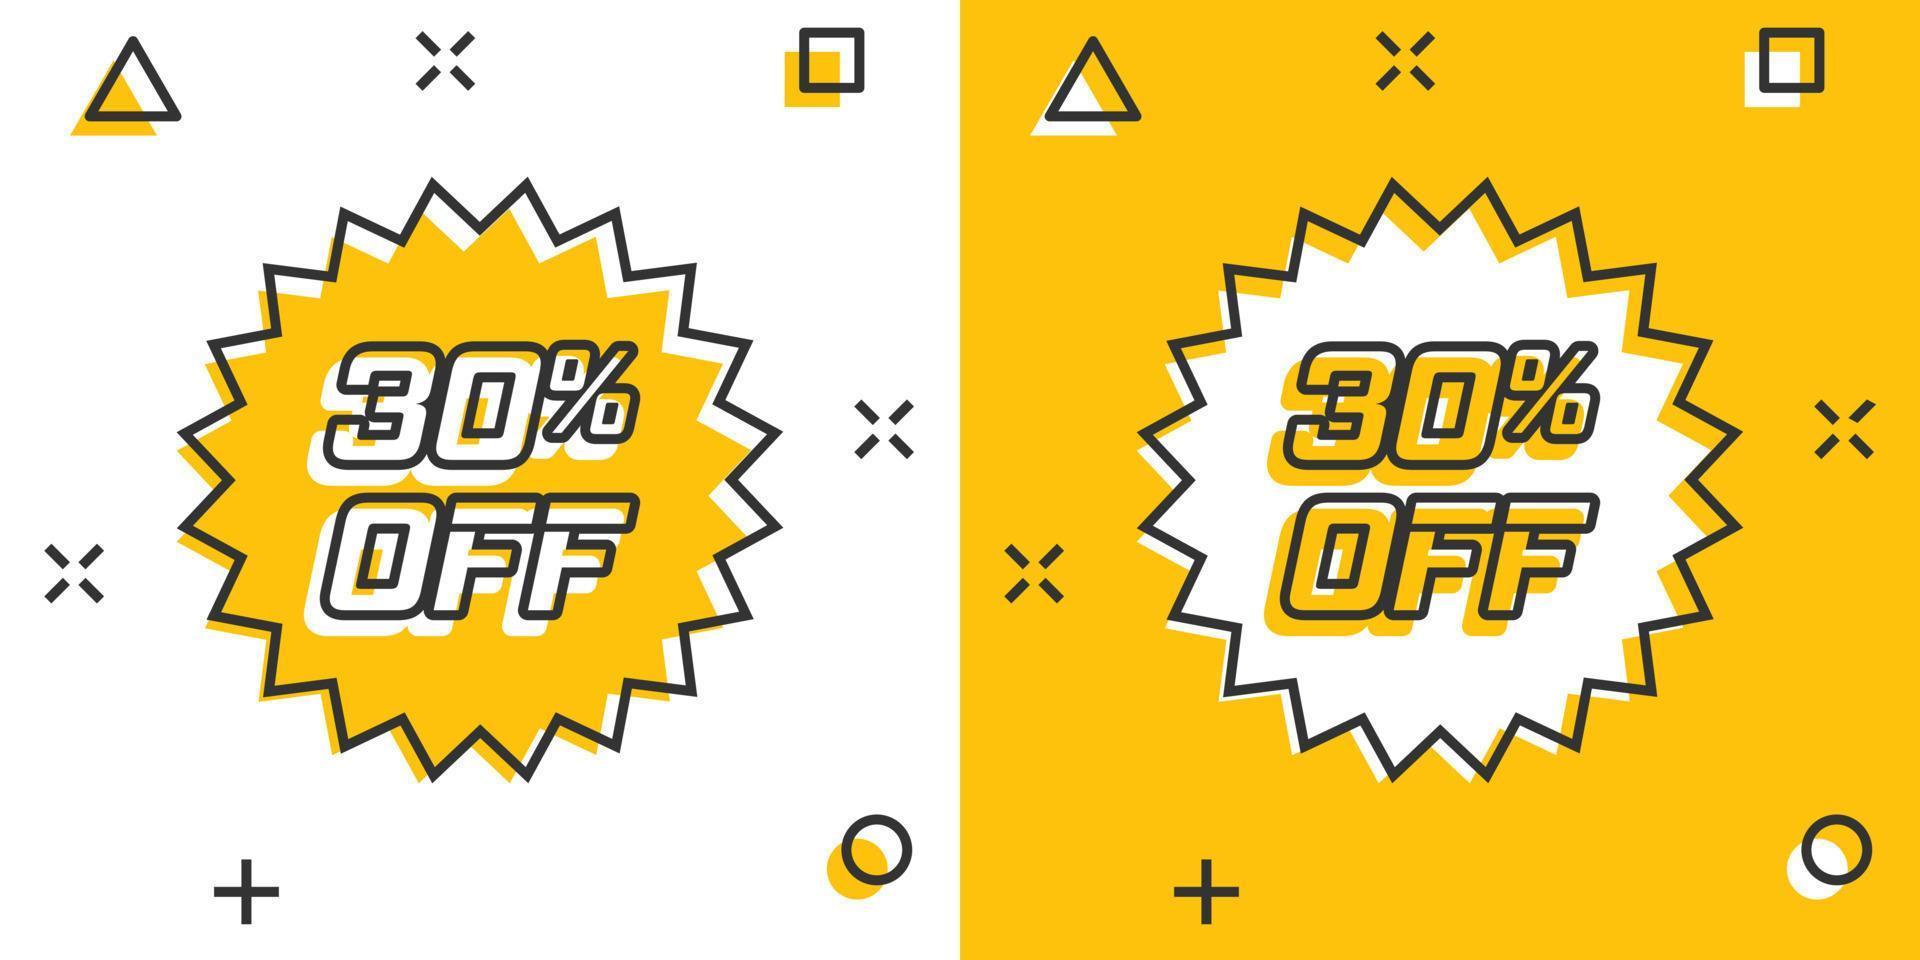 Vector cartoon discount sticker icon in comic style. Sale tag illustration pictogram. Promotion 30 percent discount splash effect concept.